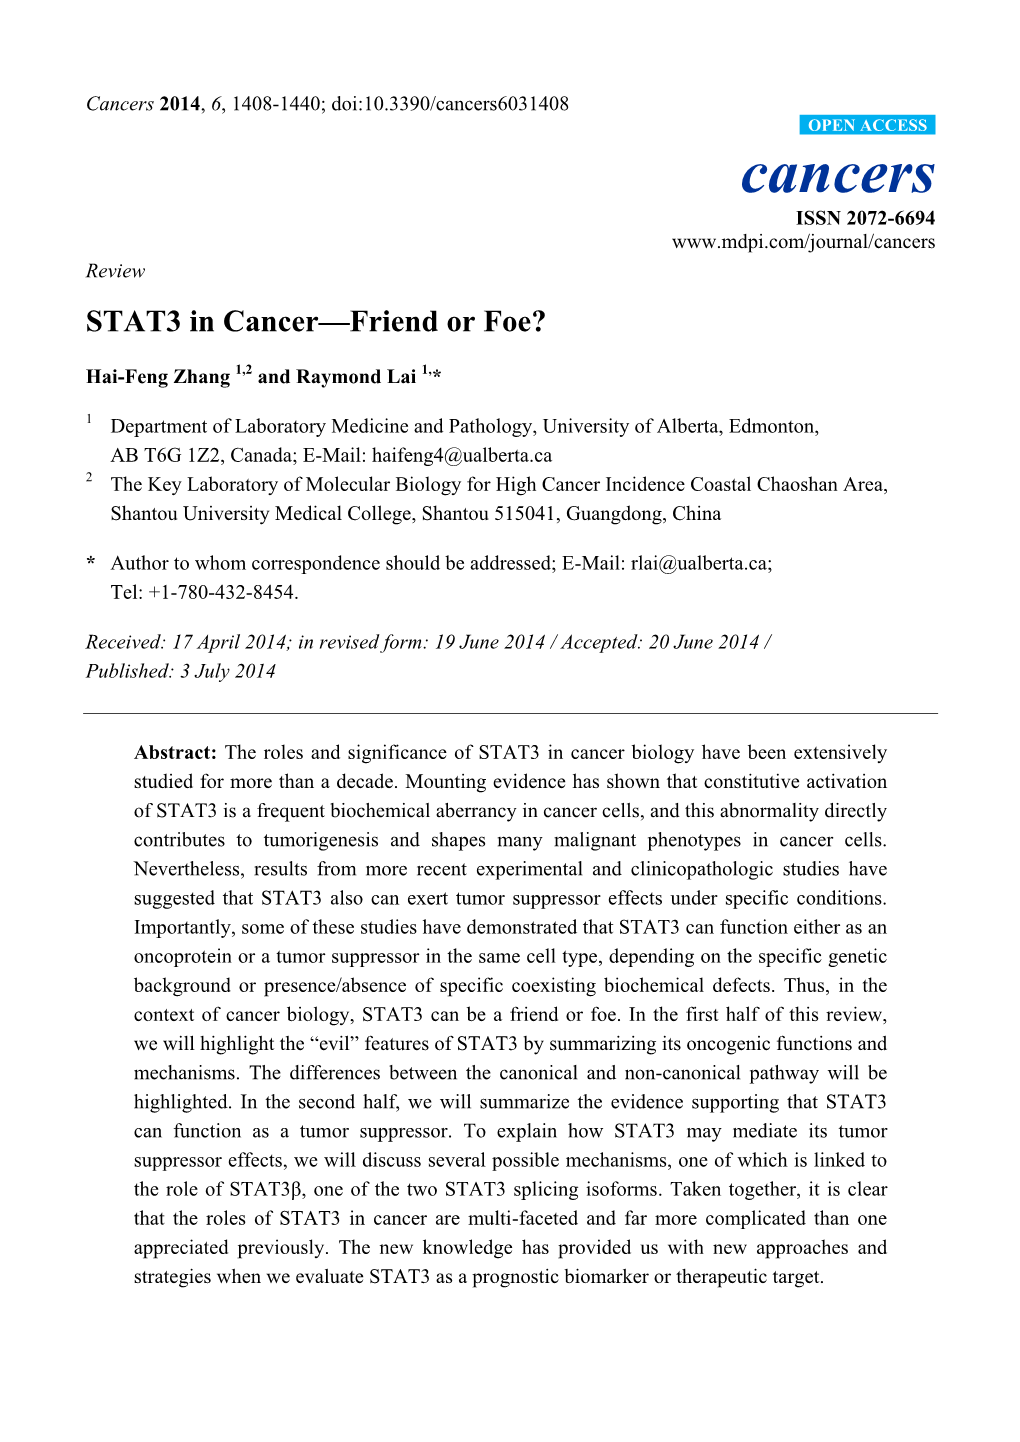 STAT3 in Cancer—Friend Or Foe?